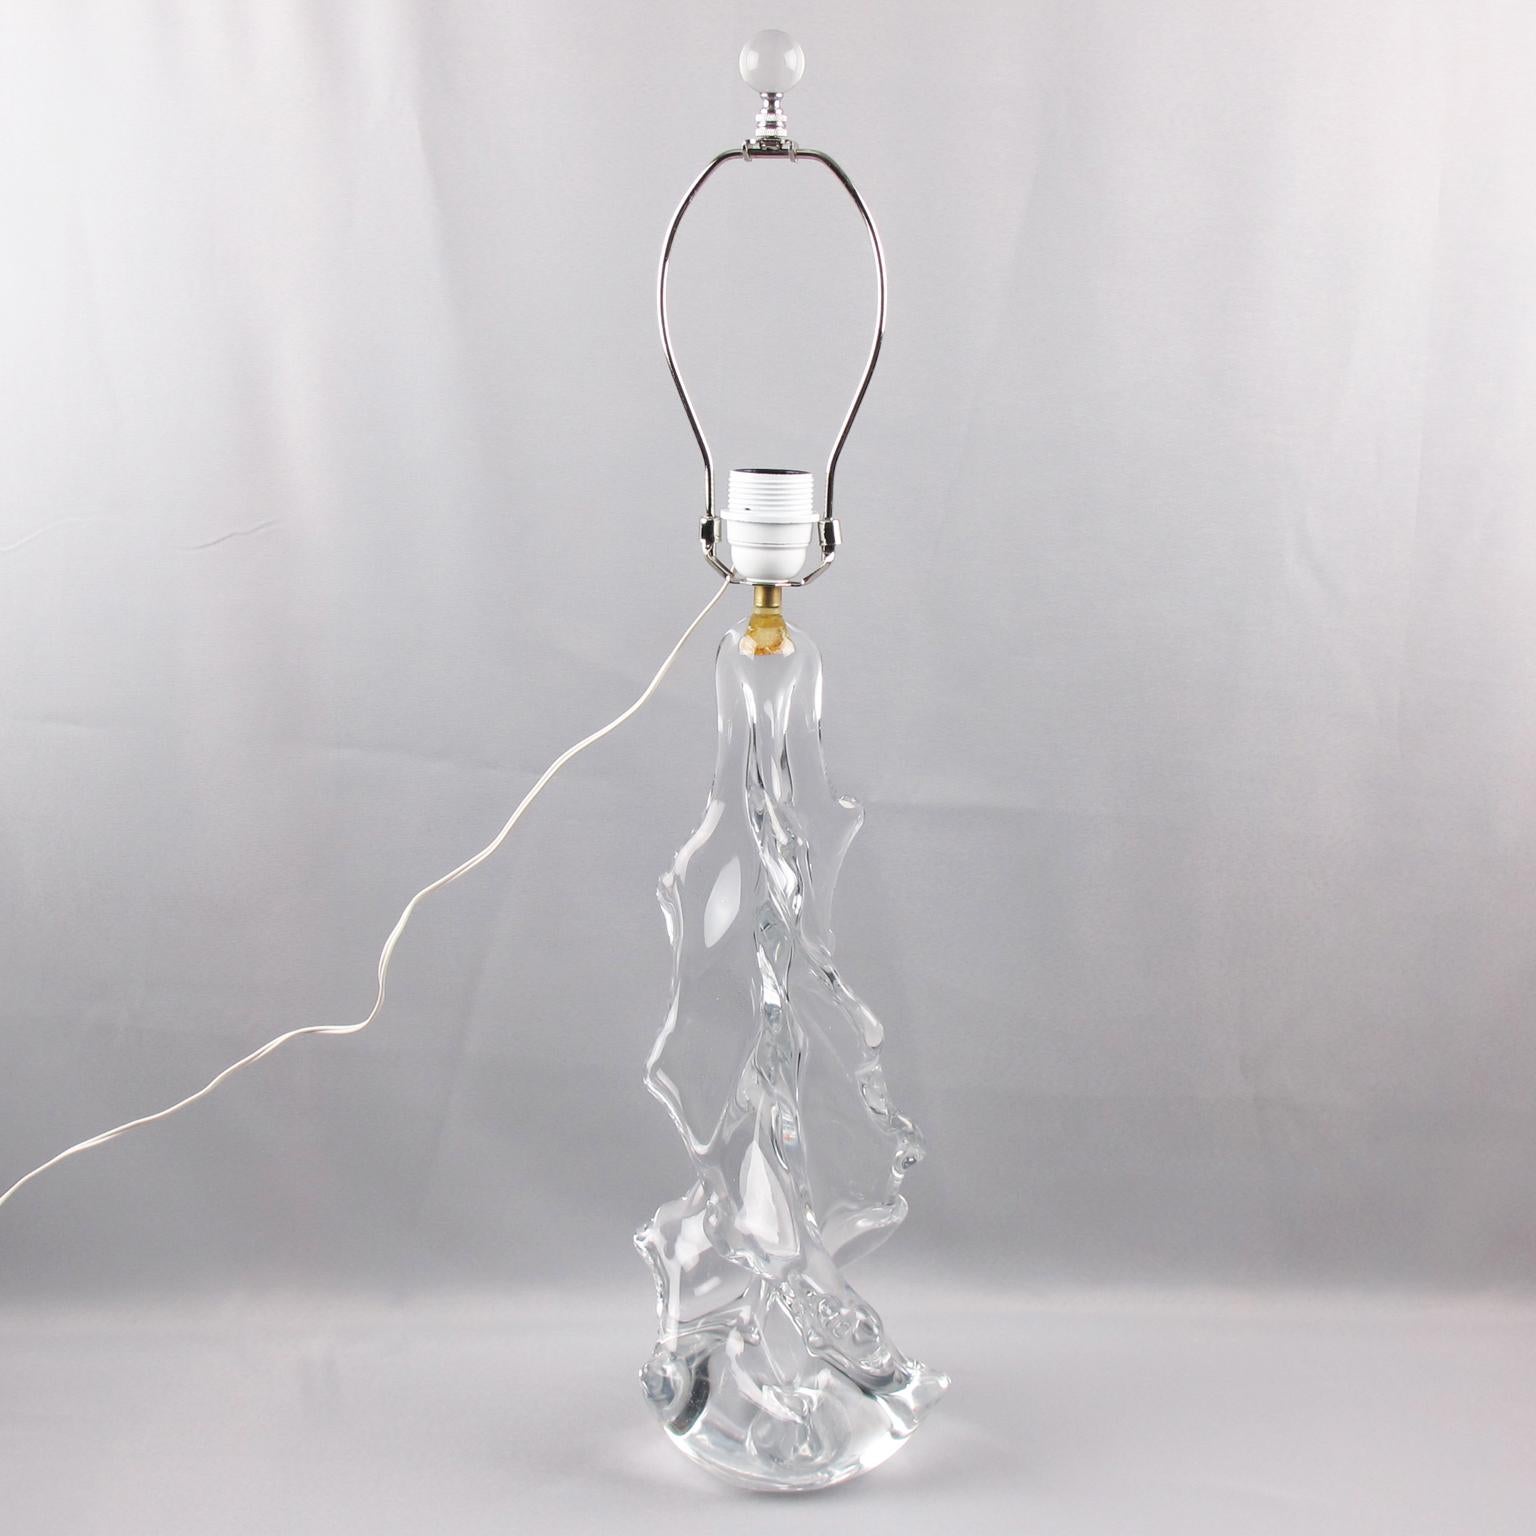 An art Glass table or desk lamp by Charles Schneider, France. Mouth-blown clear crystal with an abstract figure (that looks like a huge Christmas tree) in a curved swirl-like form. The lamp has been completely rewired to fit US standards. Marked on